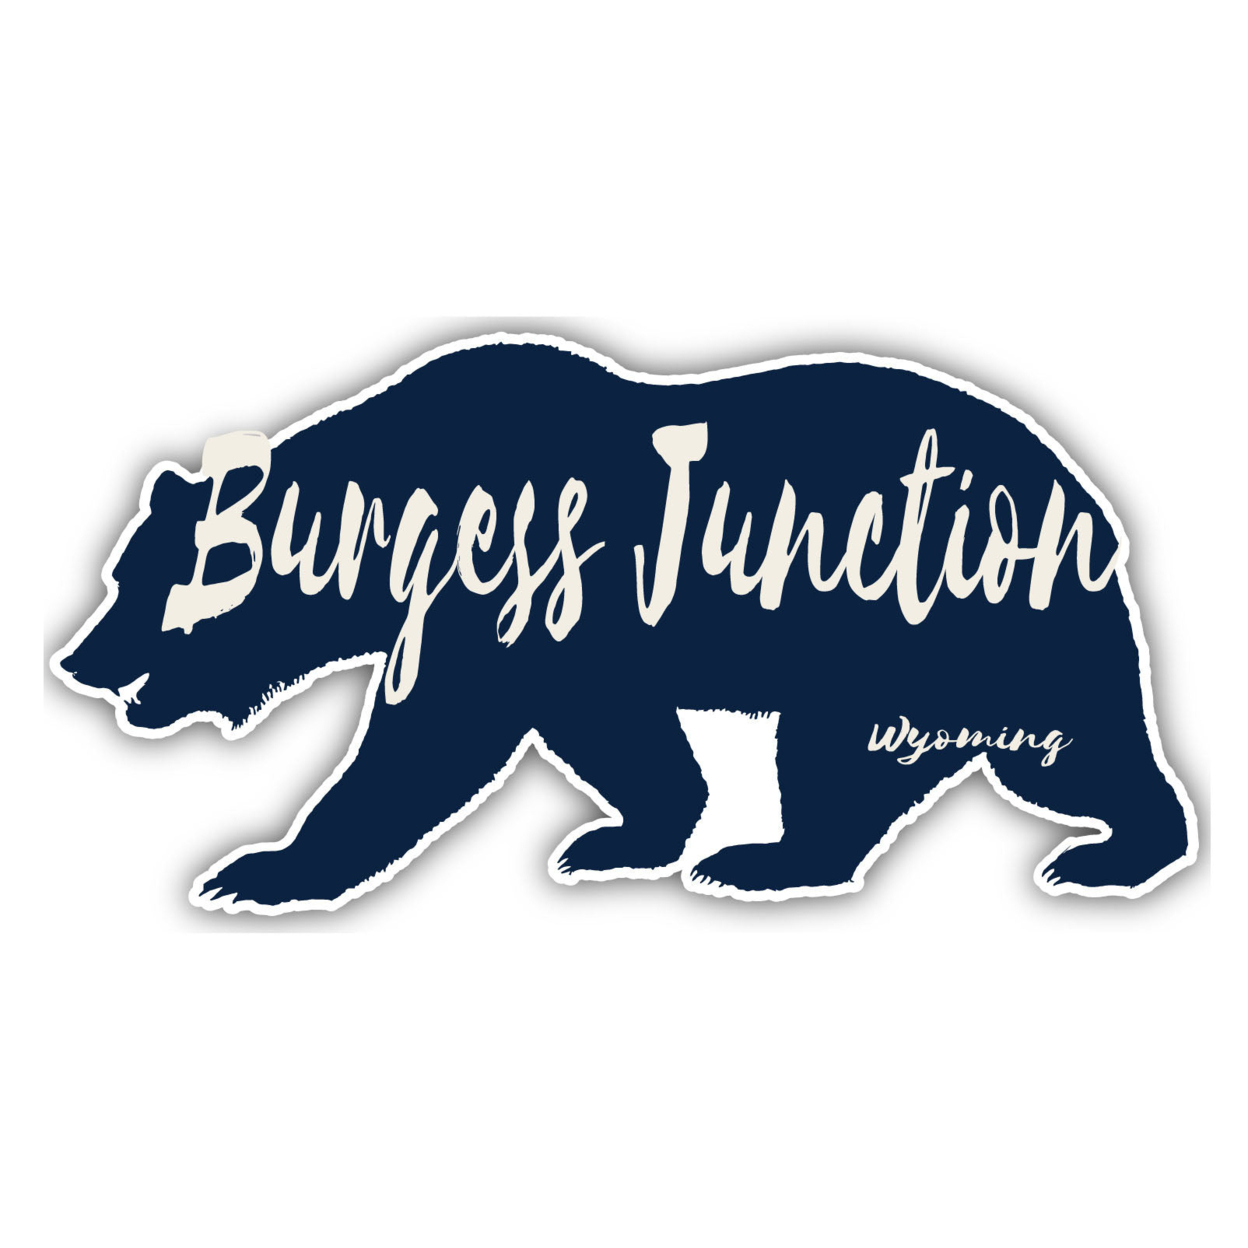 Burgess Junction Wyoming Souvenir Decorative Stickers (Choose Theme And Size) - Single Unit, 12-Inch, Bear